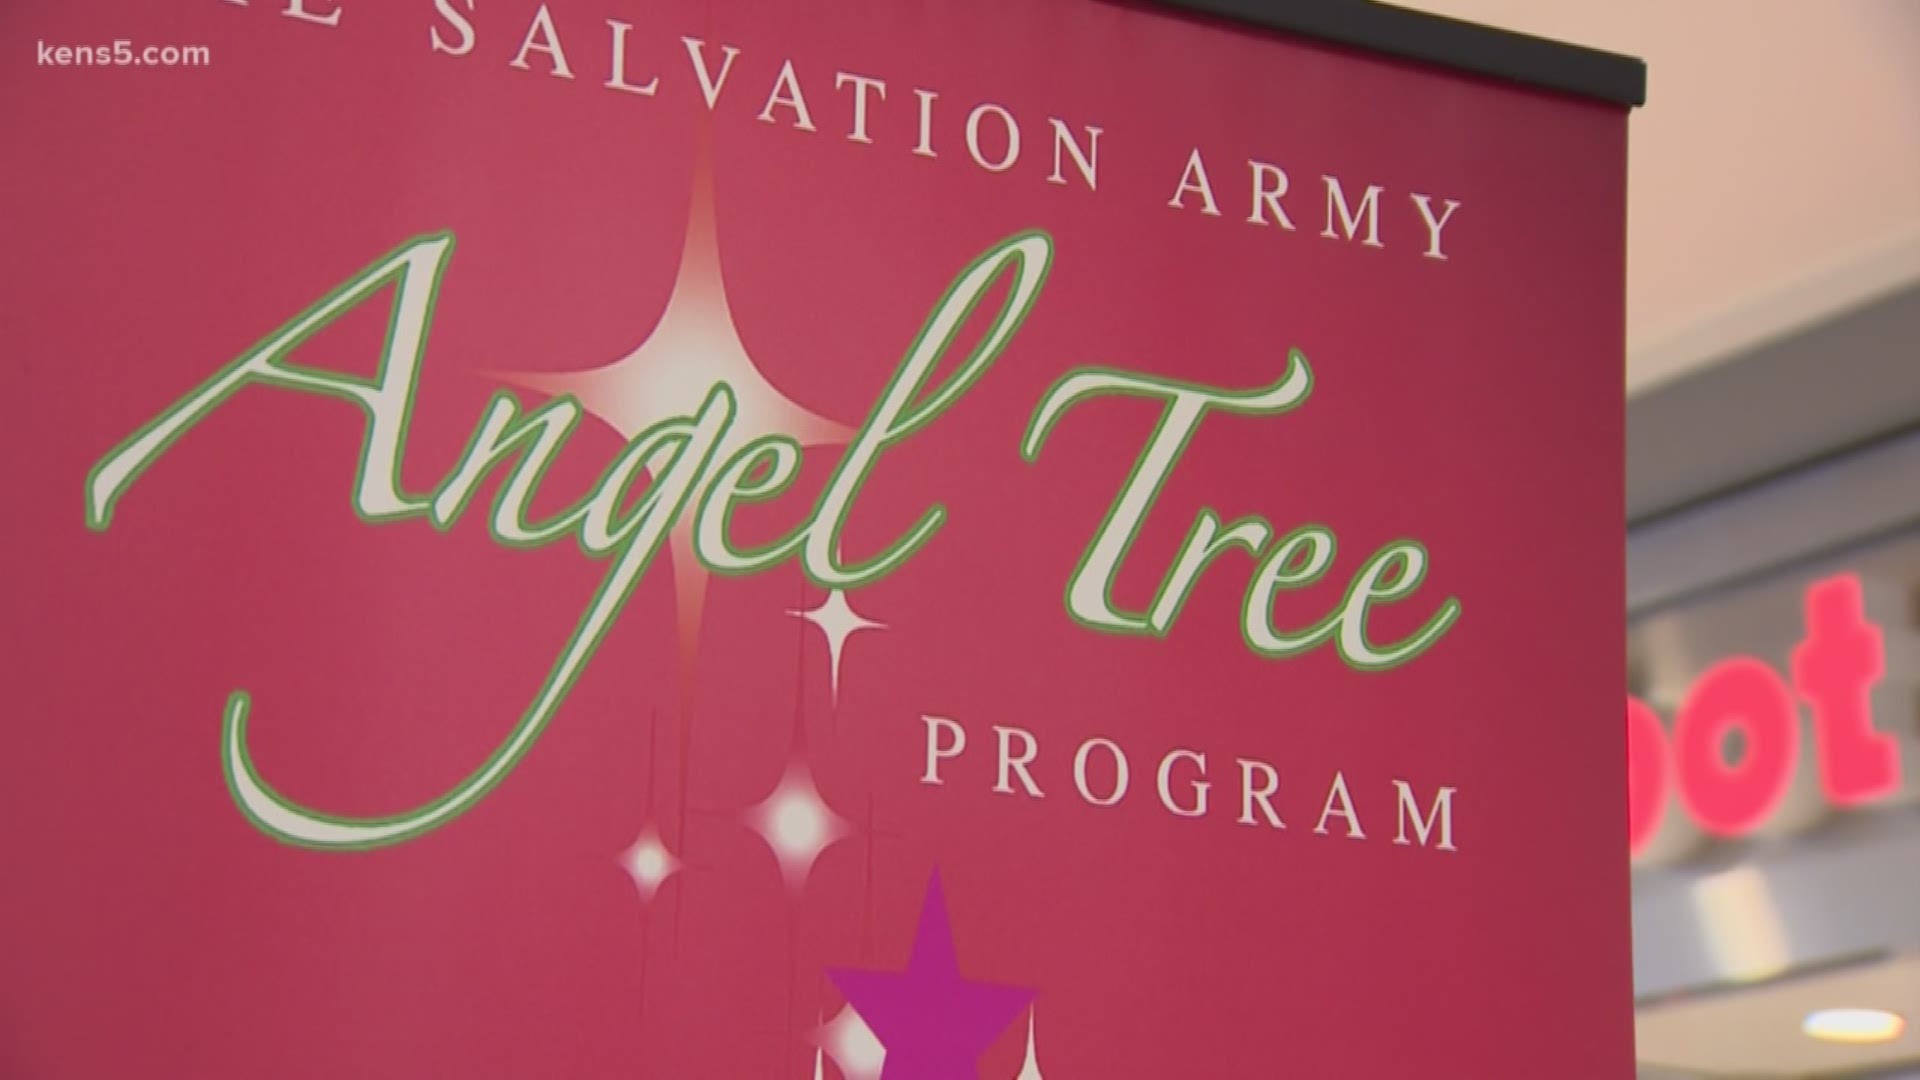 Angel Tree Program creates holiday magic for thousands of families